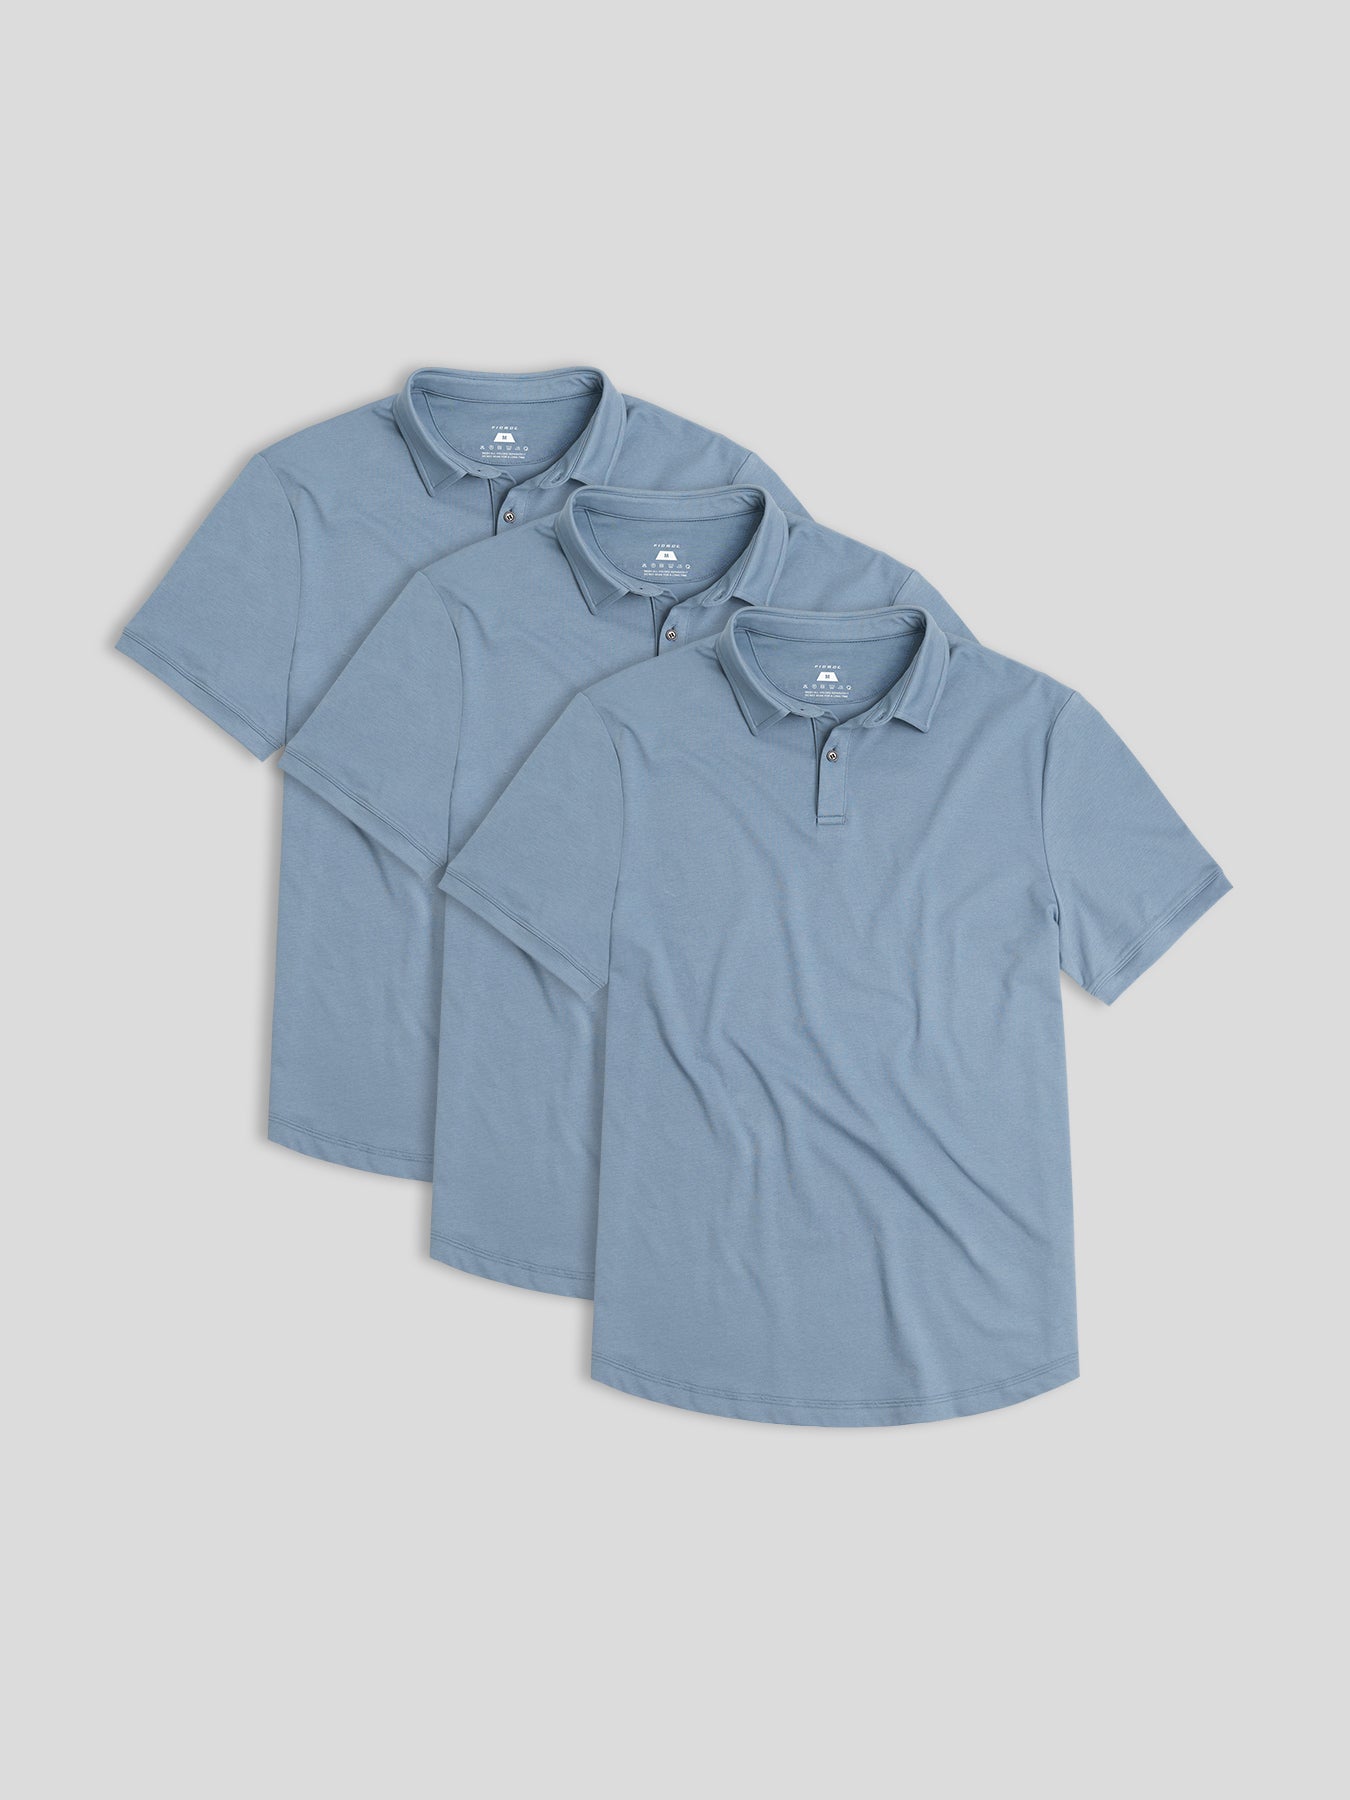 StayCool 2.0 Polo 3-Pack